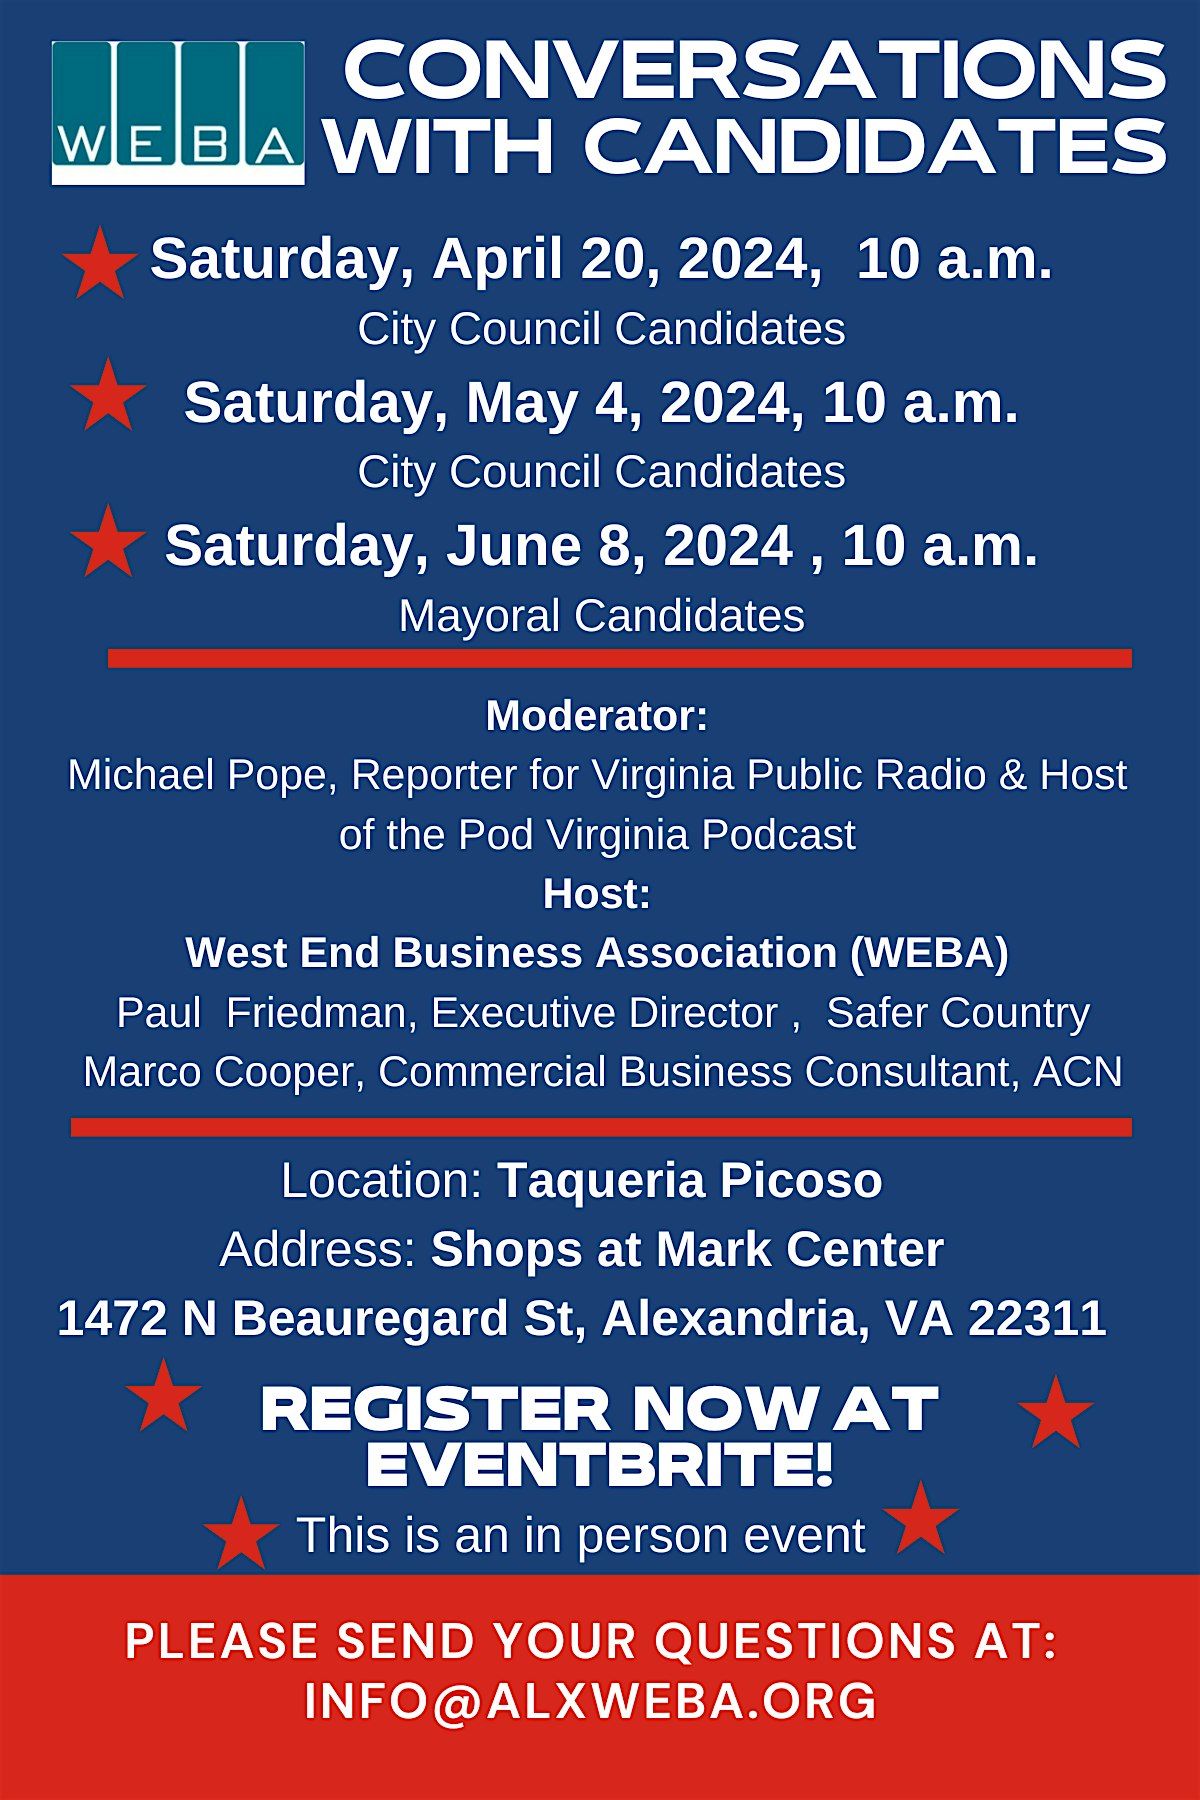 WEBA - Conversations with Mayoral Candidates, Saturday, June 8th